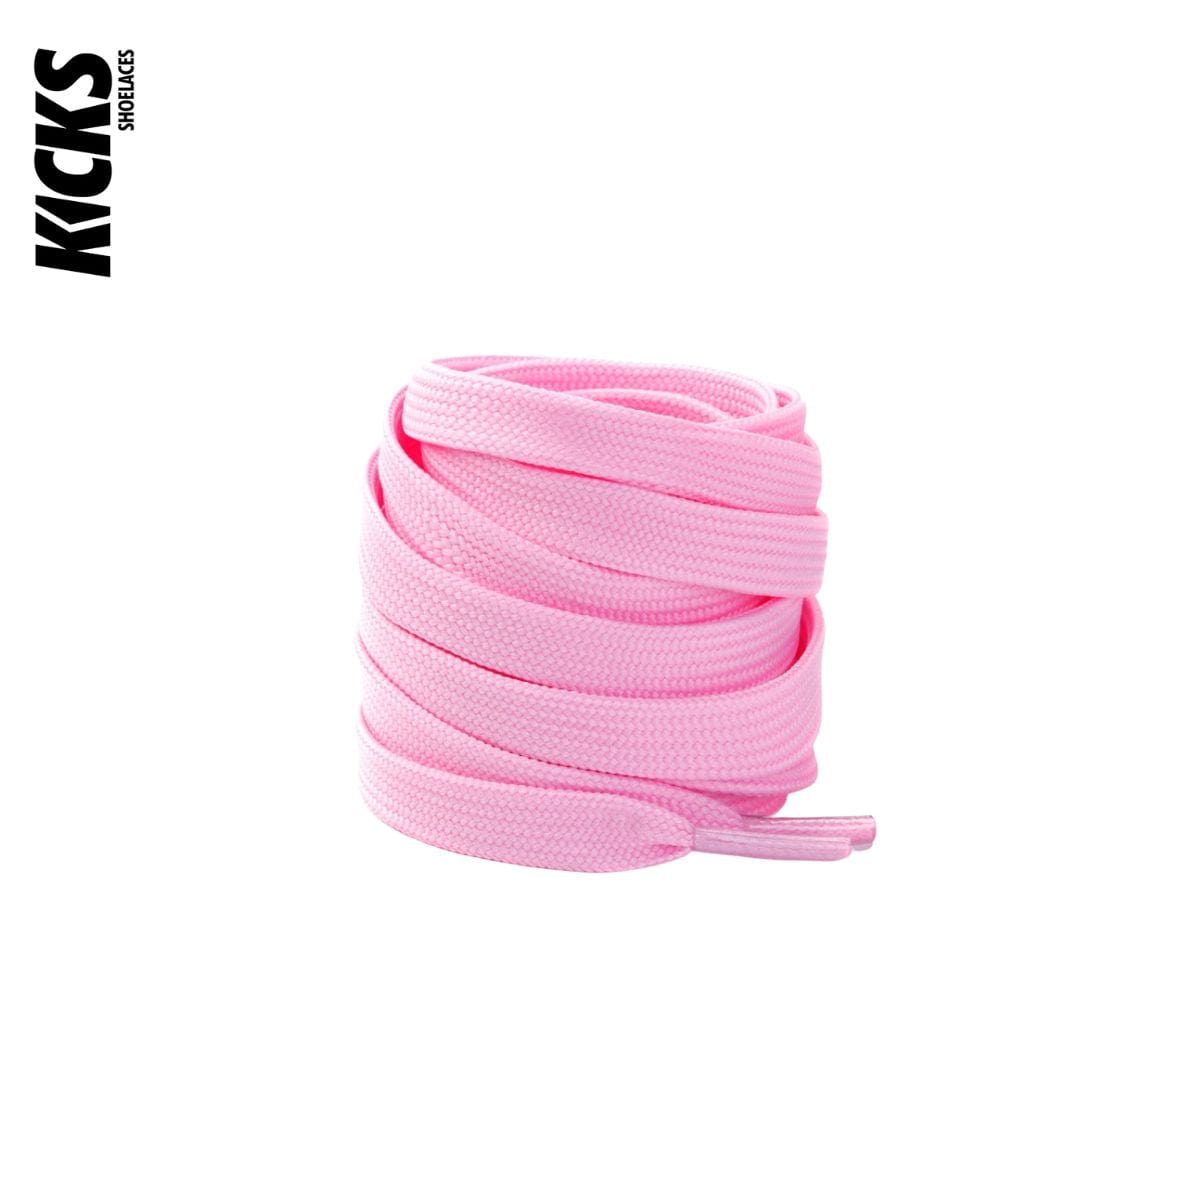 Pink Replacement Laces for Adidas EQT Sneakers by Kicks Shoelaces